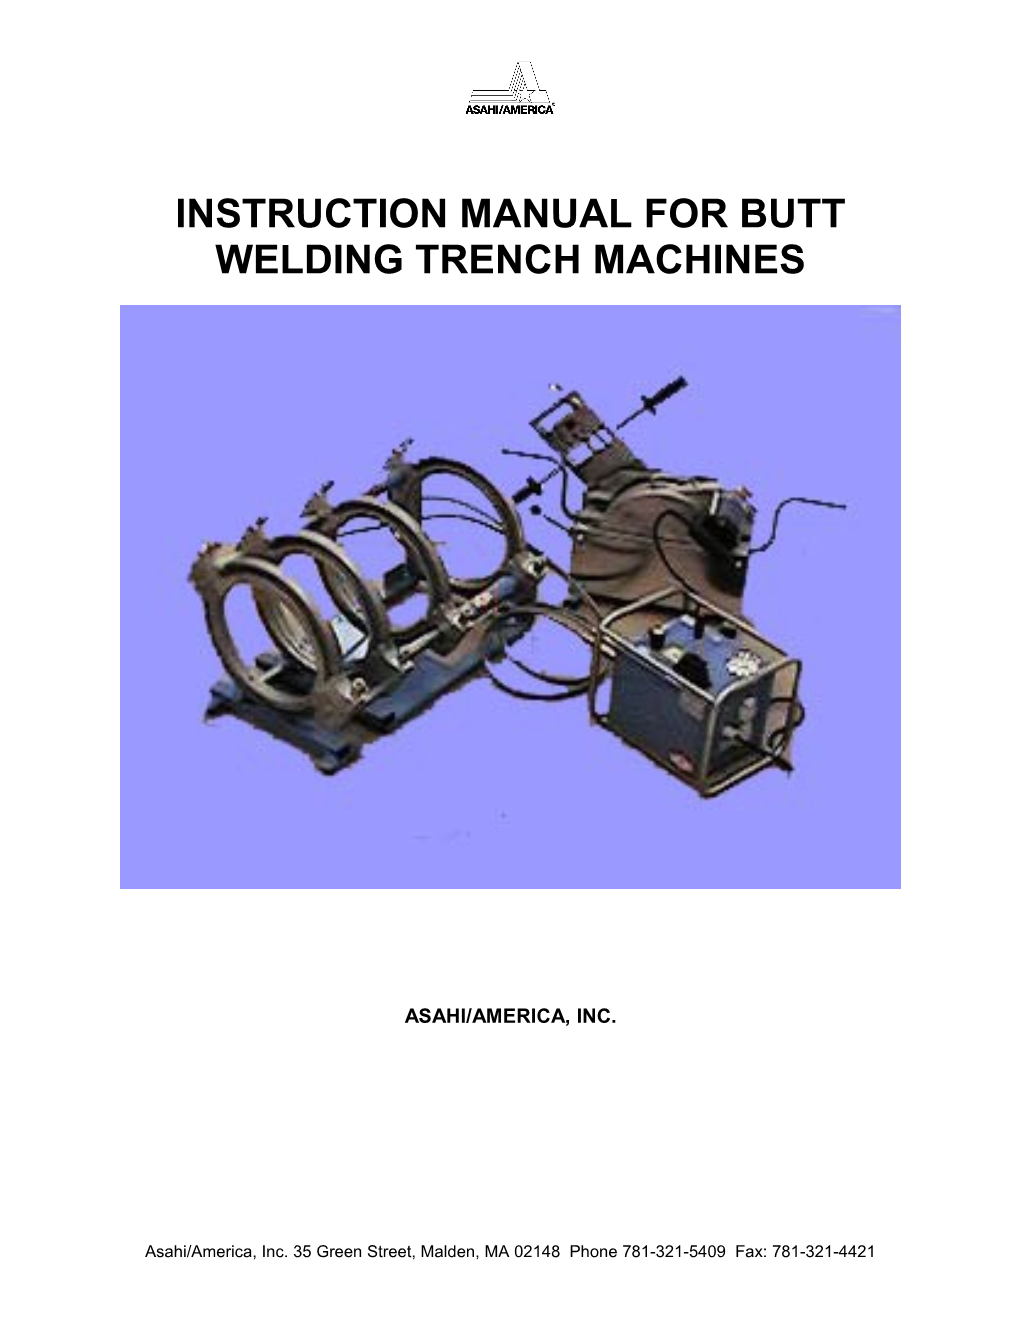 Instruction Manual for Butt Welding Trench Machines